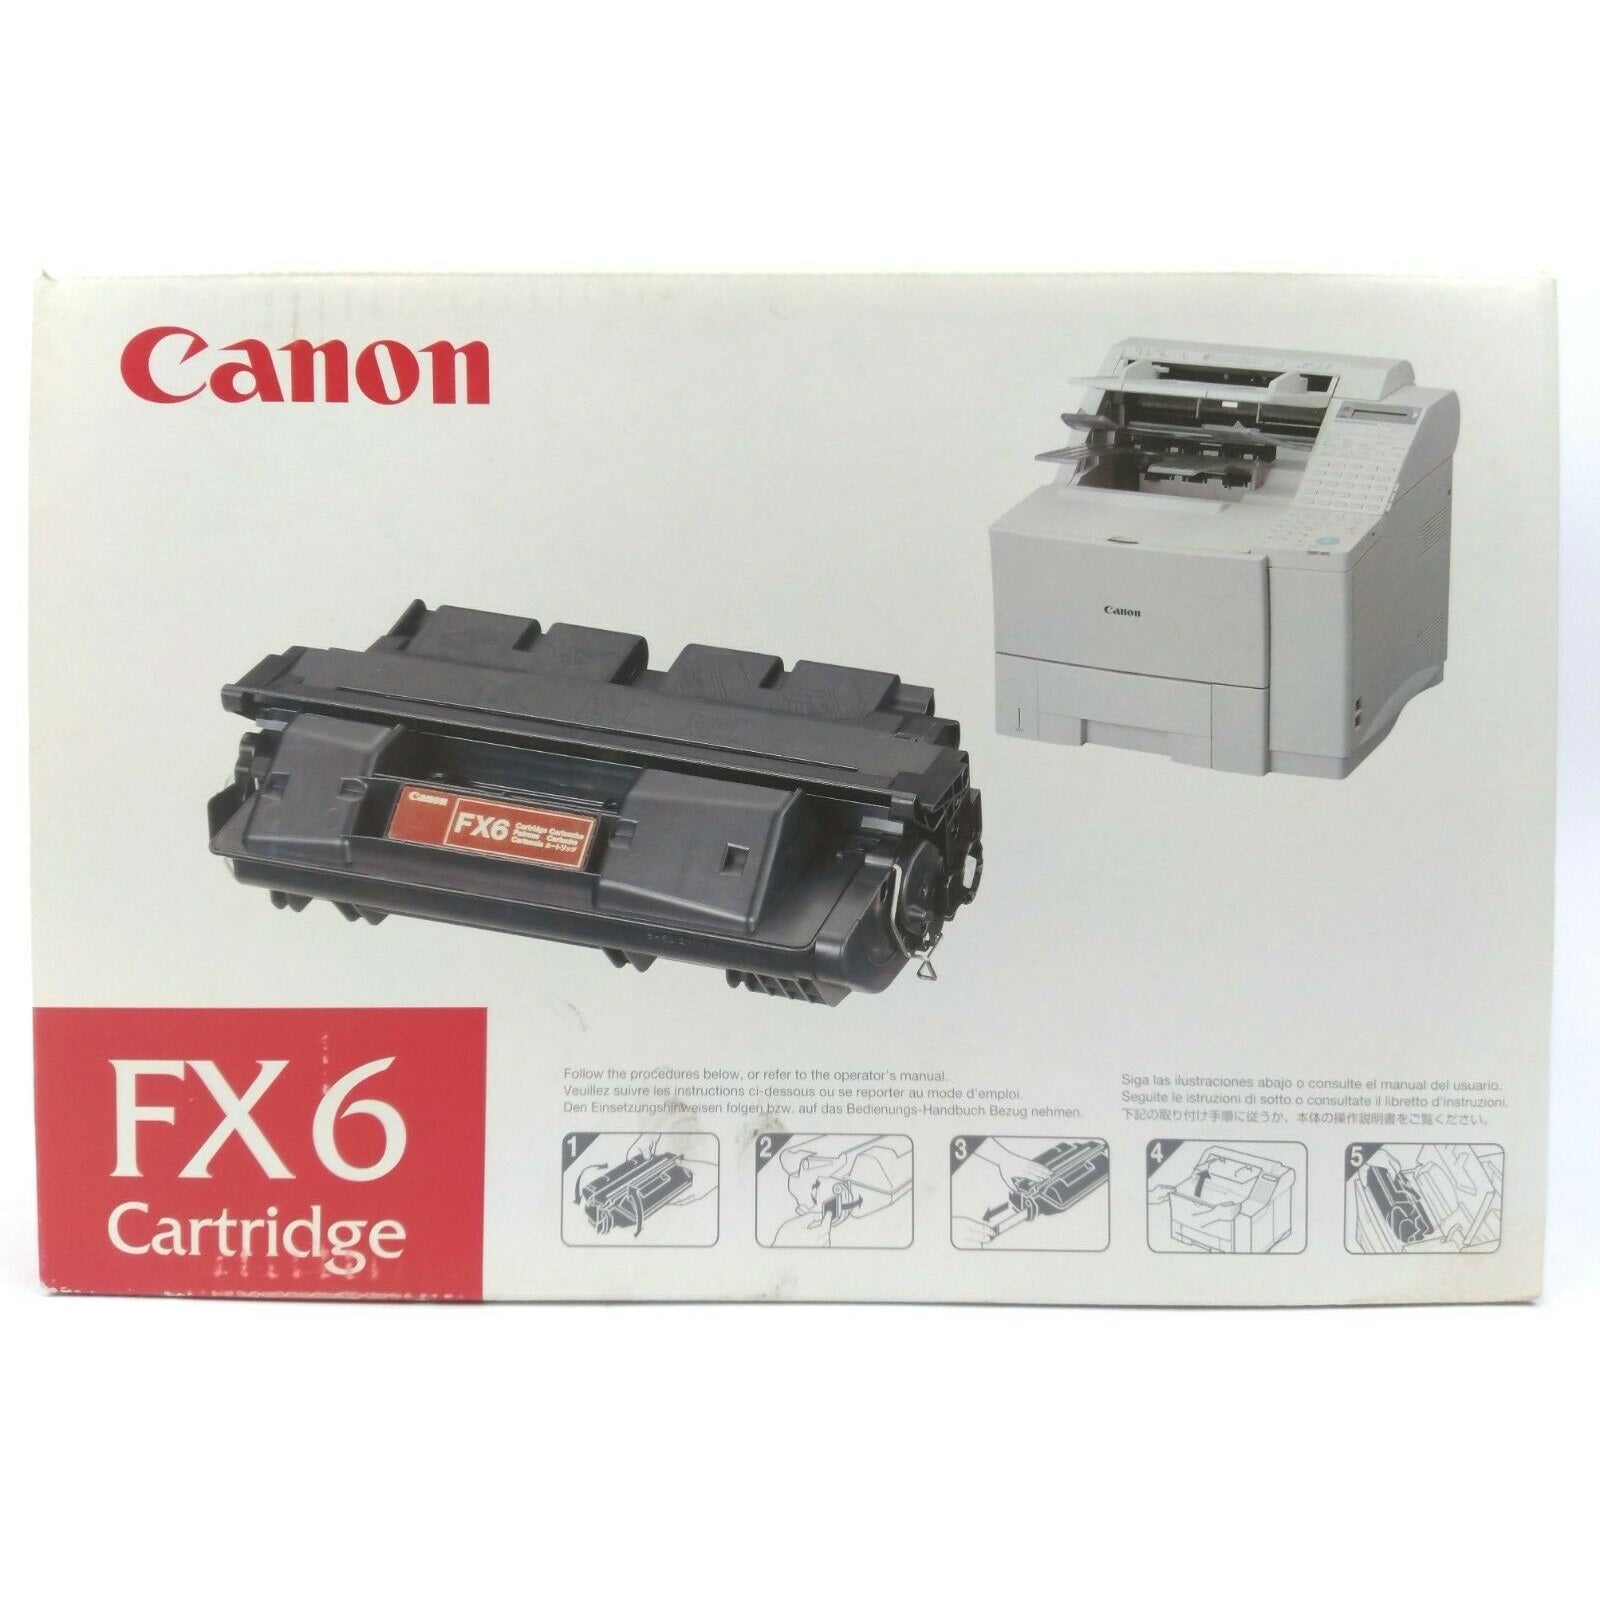 Absolute Toner Genuine/OEM Canon 1559A002 / Fx6 (Fx-6) Black Laser Toner Cartridge For Use Canon LaserClass 3170 Series, Fax-L1000 - Black Print Cartridge (Approx 5,000 Page/Yield) Original Canon Cartridges